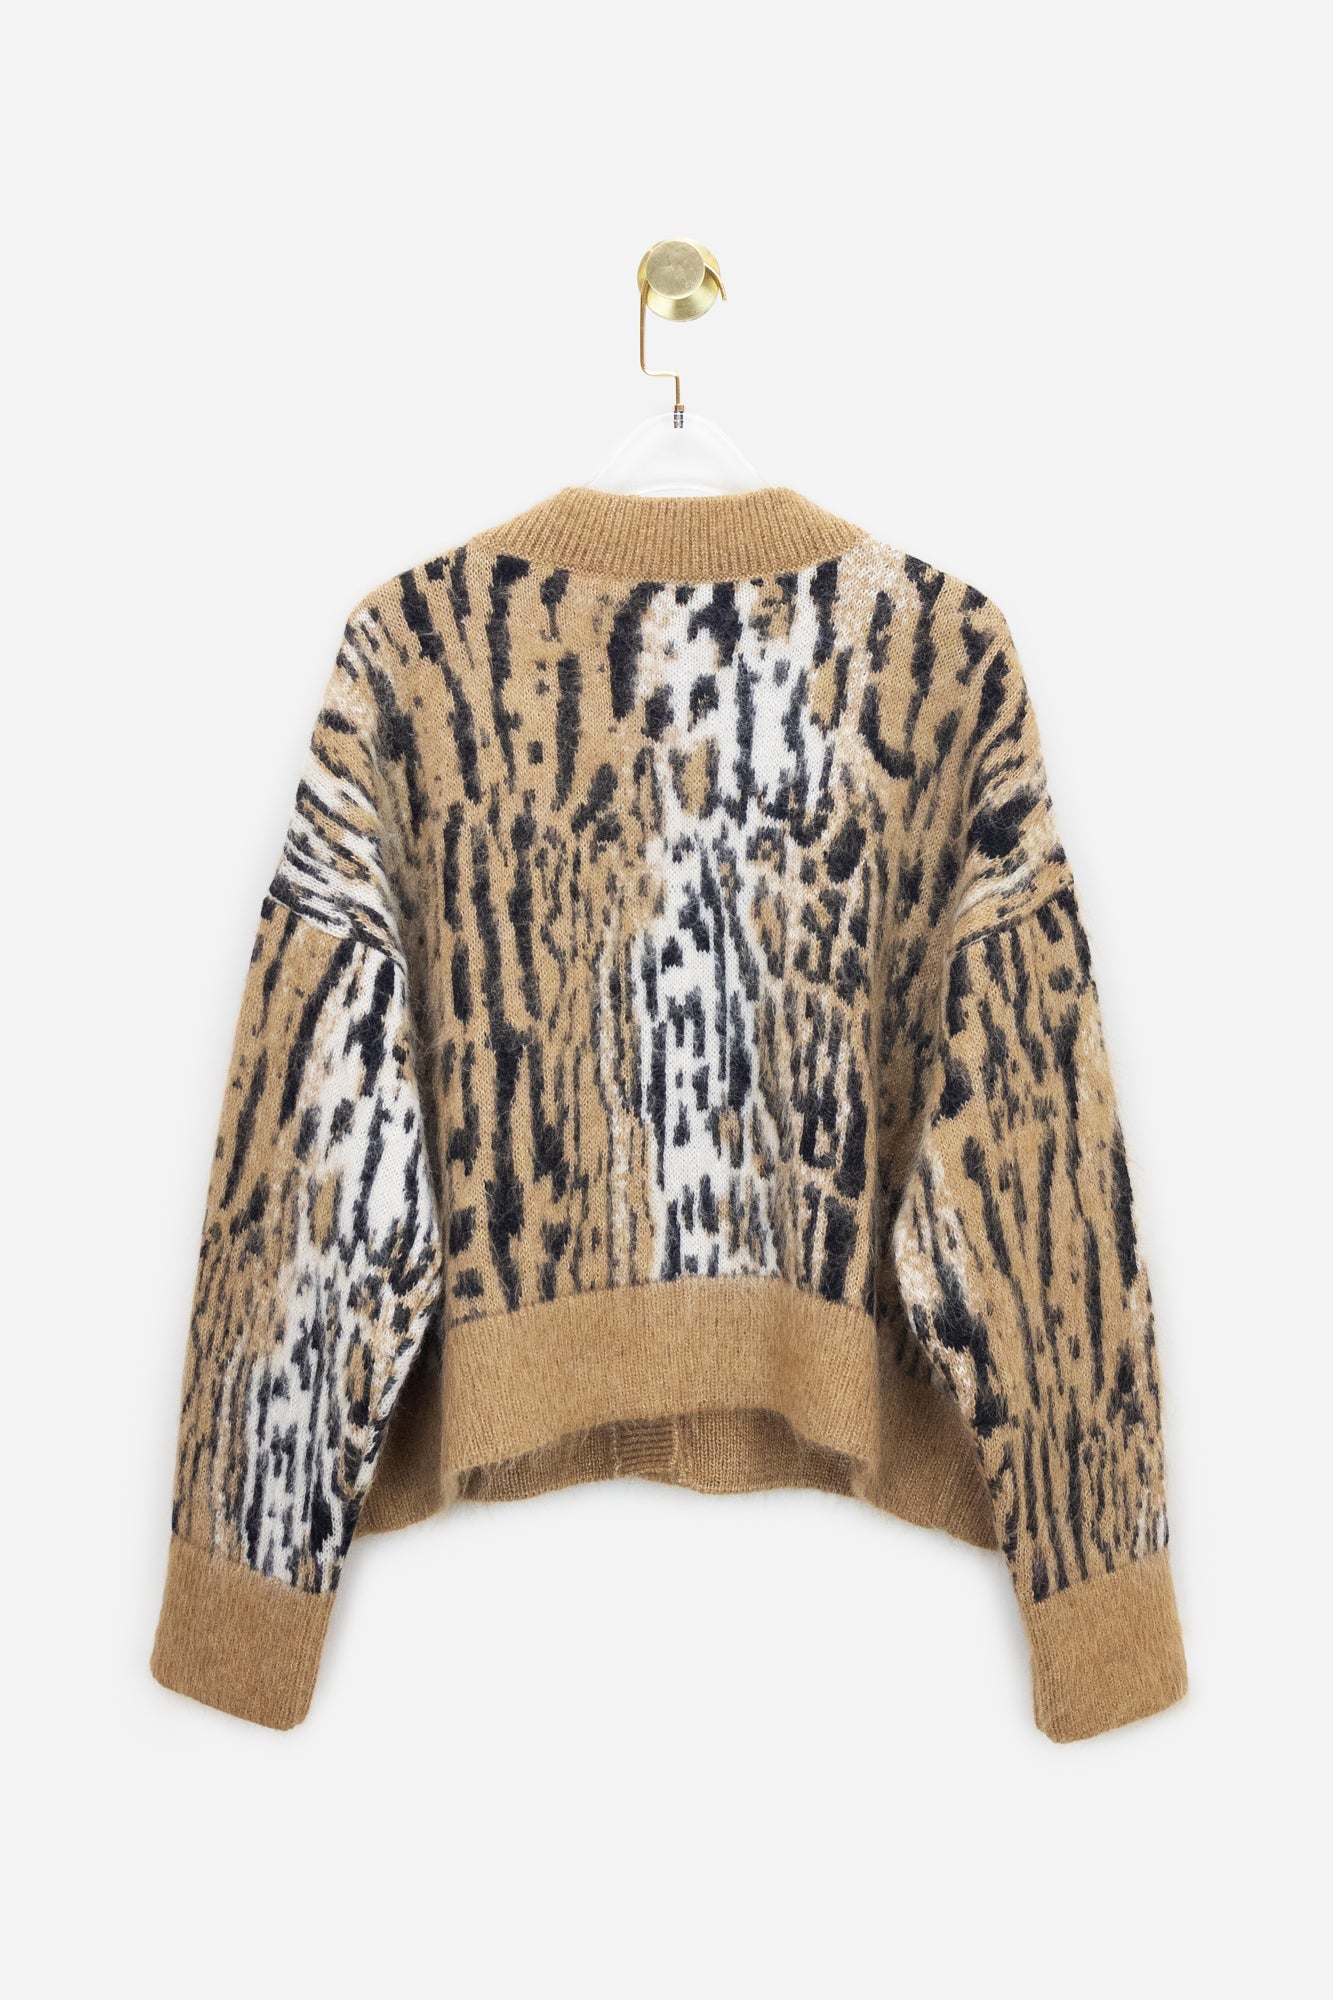 Animal Print Knit Cardigan - So Over It Luxury Consignment